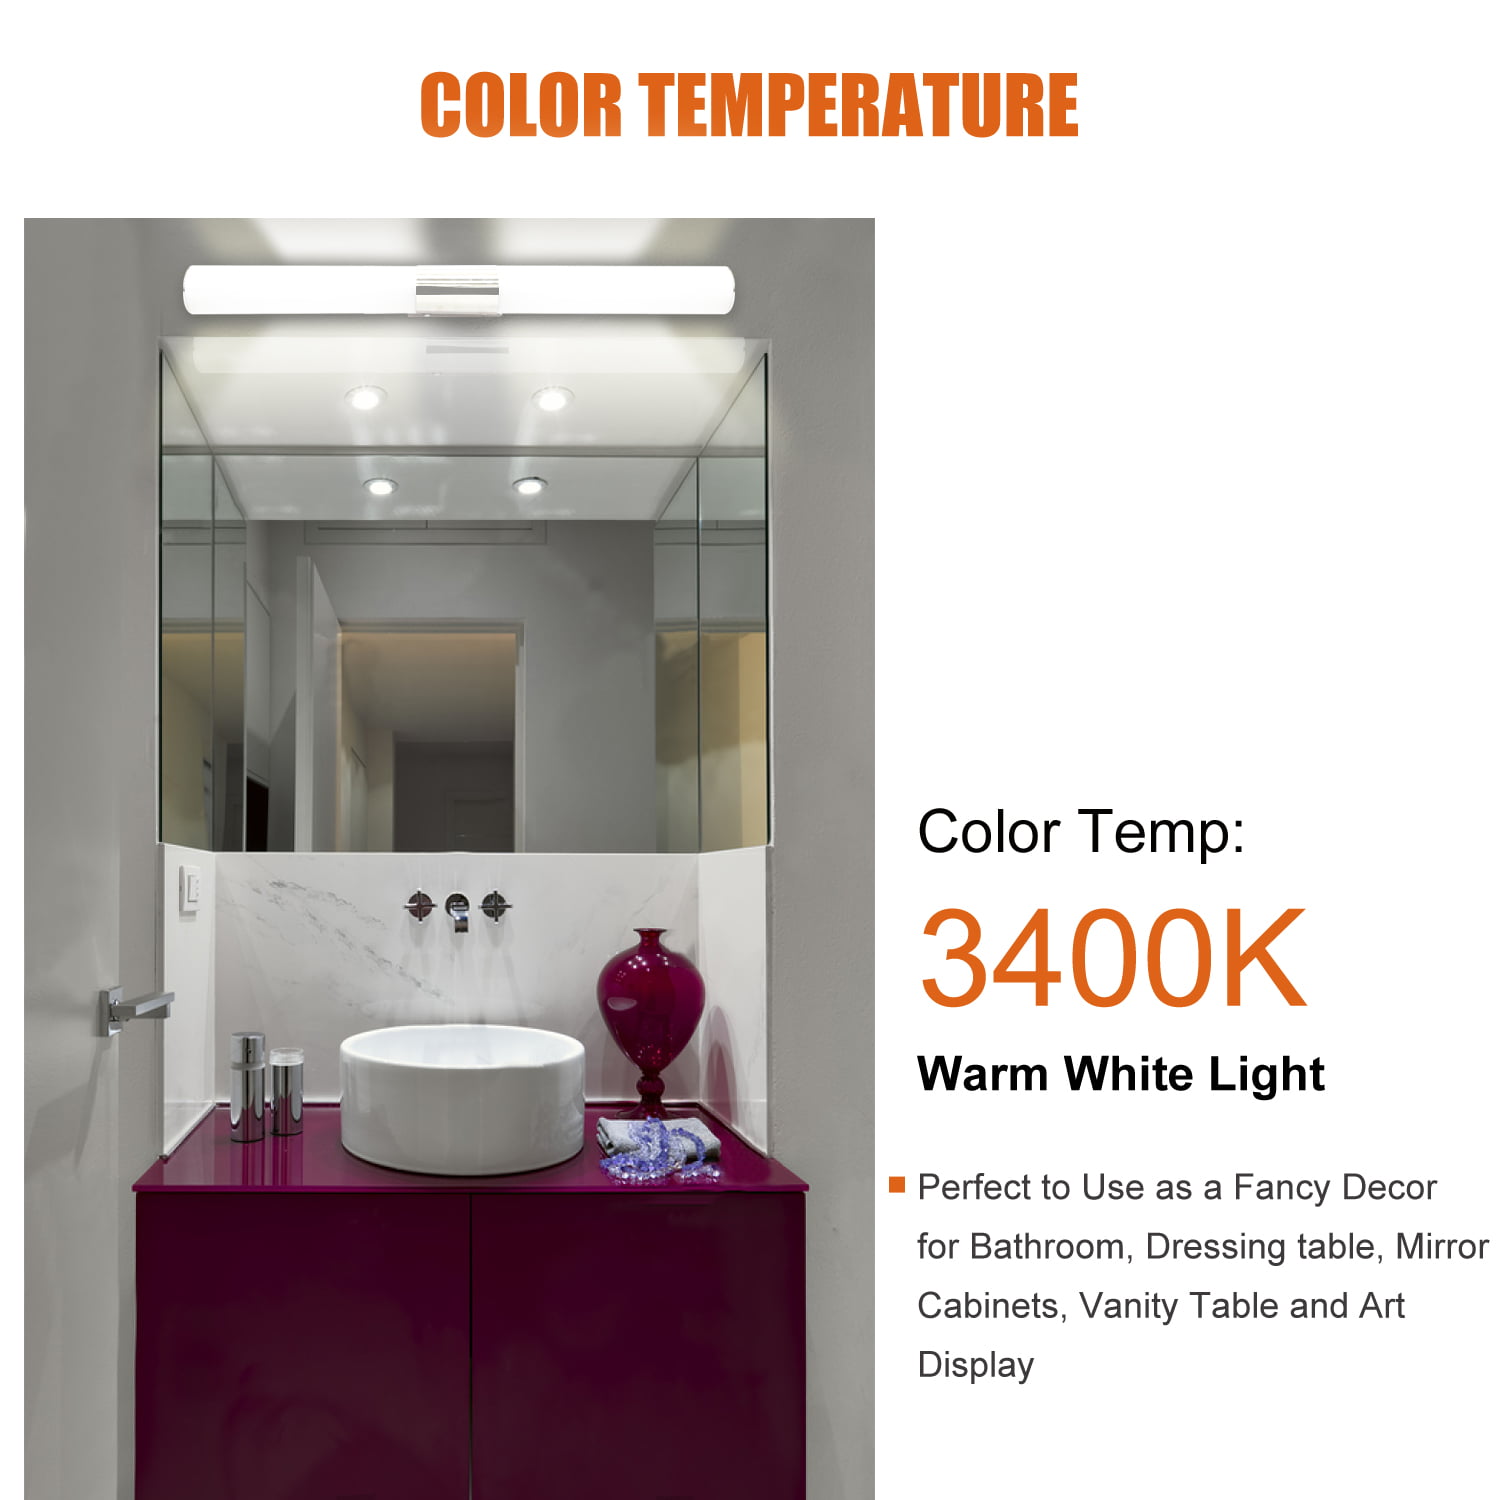 2 Years Warranty at Touch Wall Mirror IP54 Rated ETL Listed LEDMyplace 22 Inch Round LED Bathroom Lighted Mirror CCT Remembrance Bathroom Vanity Mirror with On//Off Power Switch